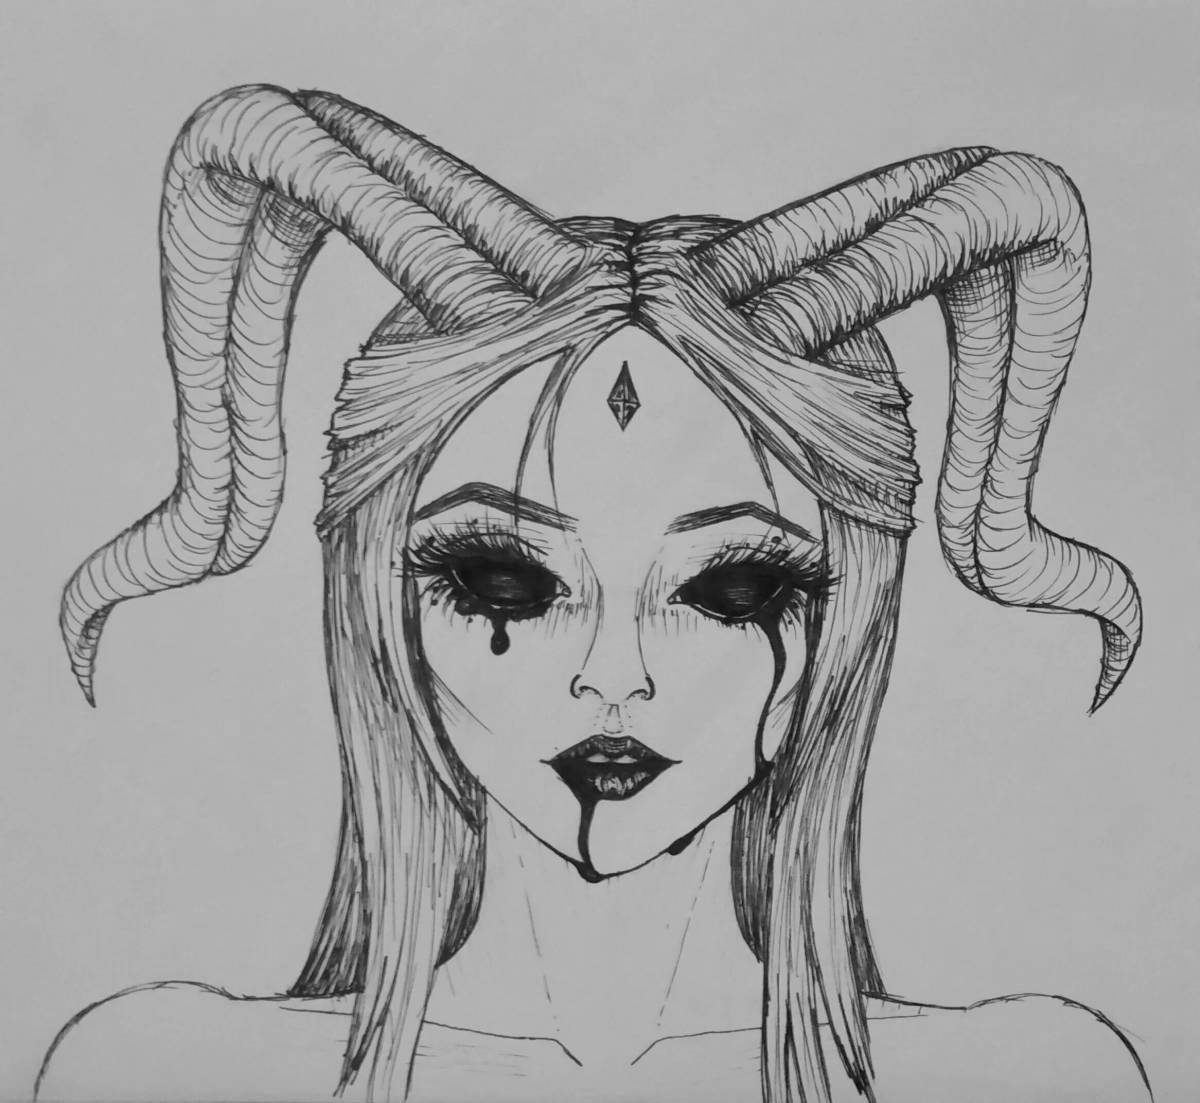 Hypnotic coloring of a girl with horns